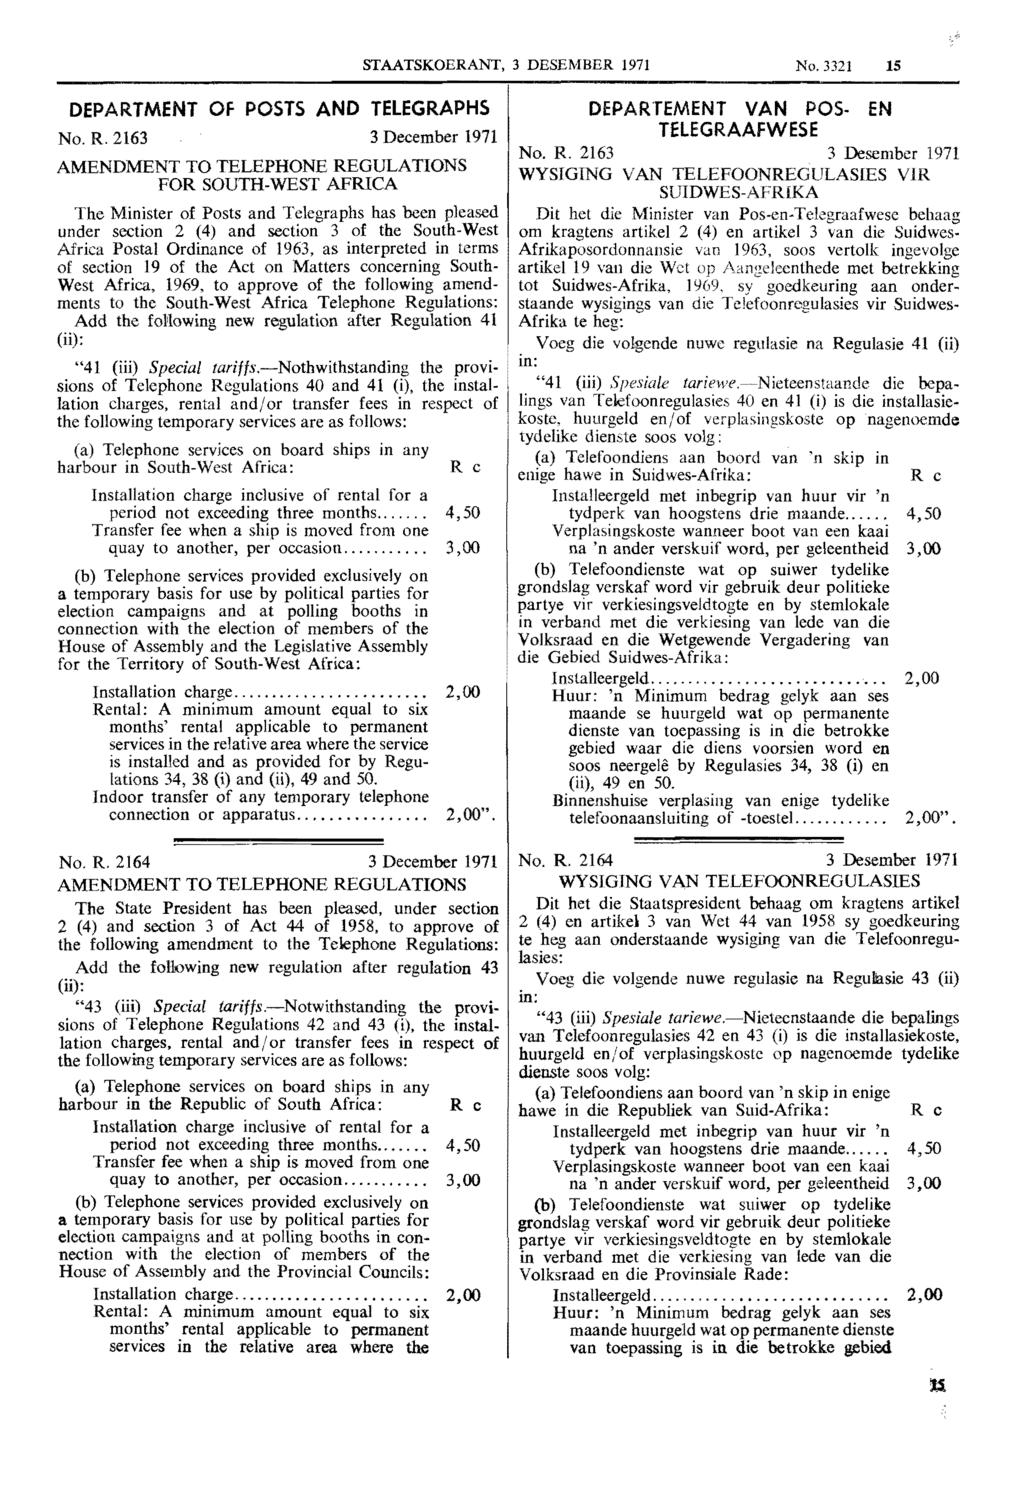 STAATSKOERANT, 3 DESEMBER 1971 No. 3321 15 DEPARTMENT Of POSTS AND TELEGRAPHS No. R.